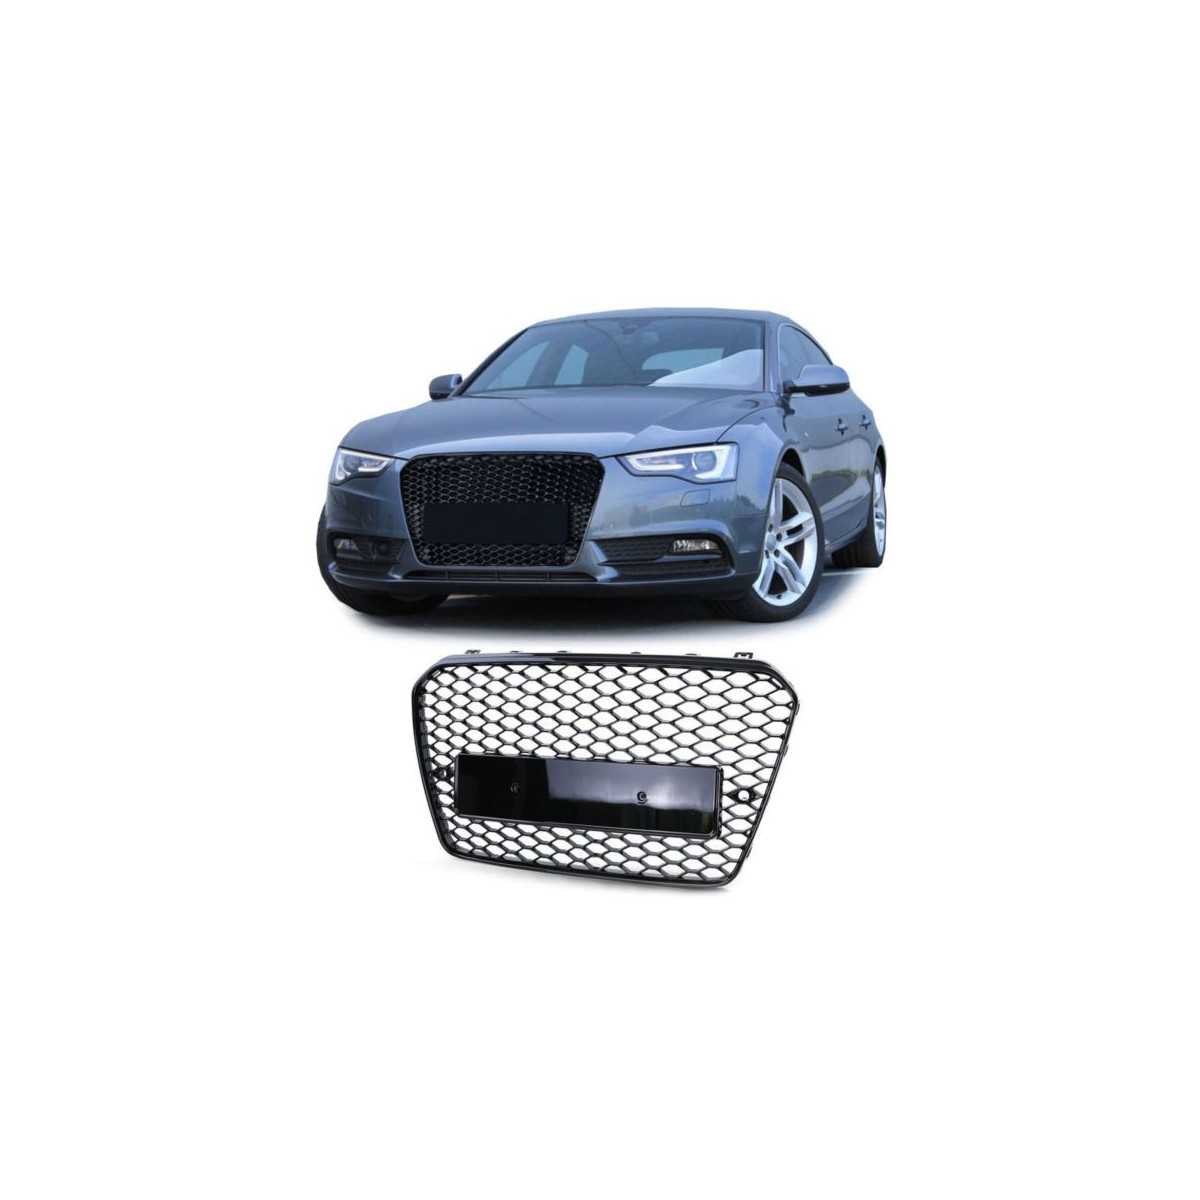 GRILL AUDI A5 11-16 RS5 STYLE GLOSSY BLACK